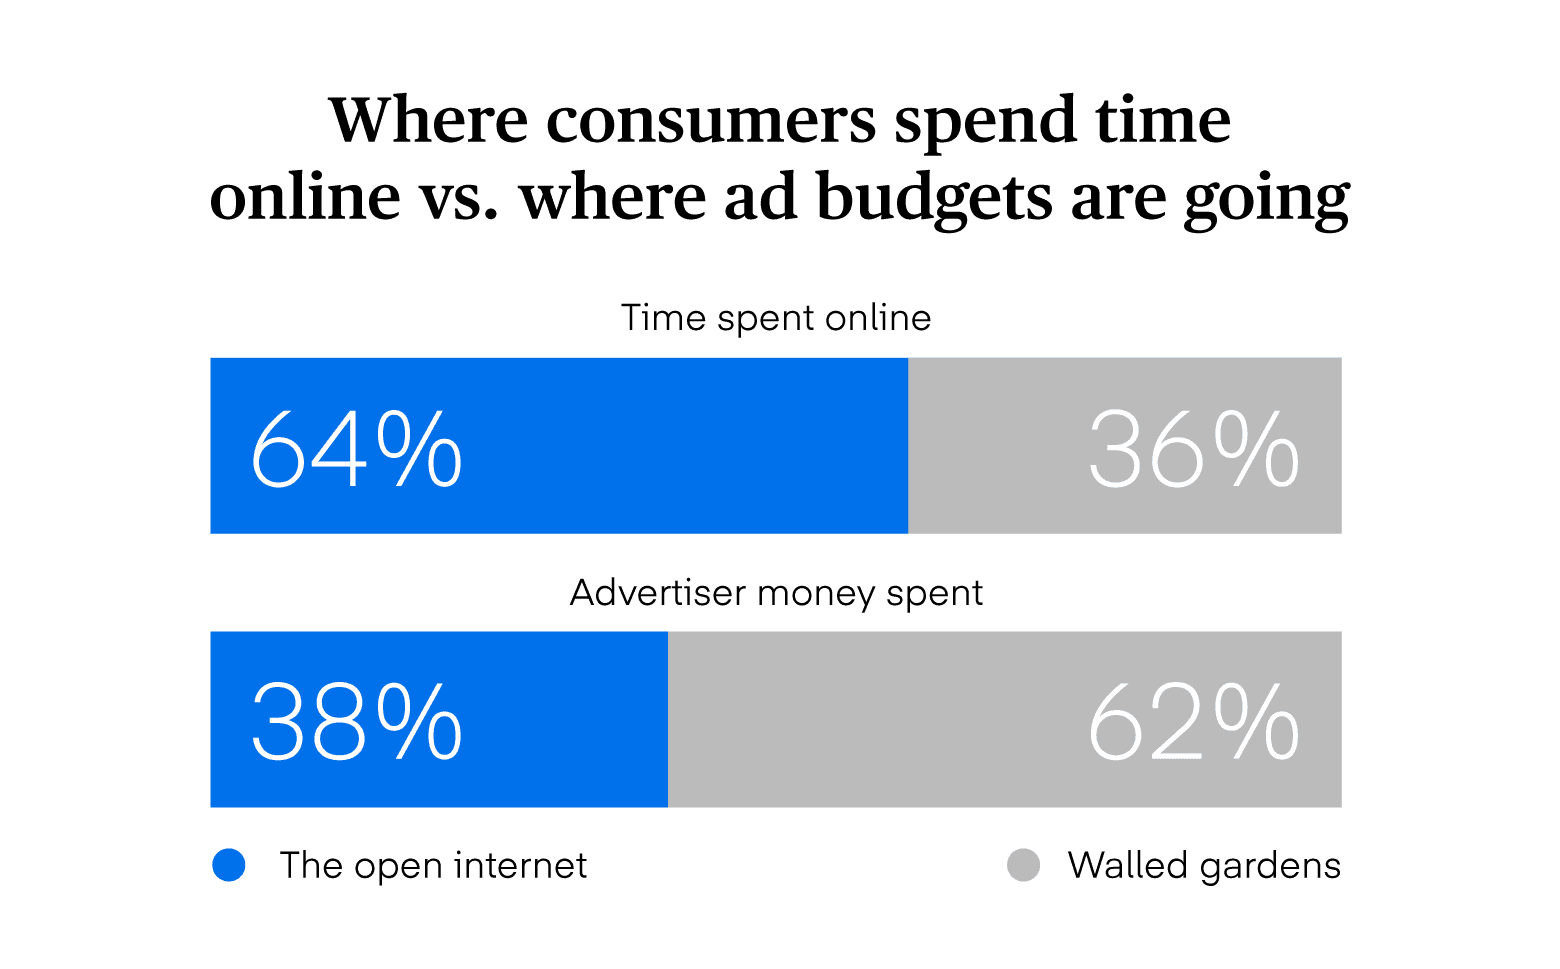 Data visualization displaying where Australian consumers spend time online vs where ad budgets are going